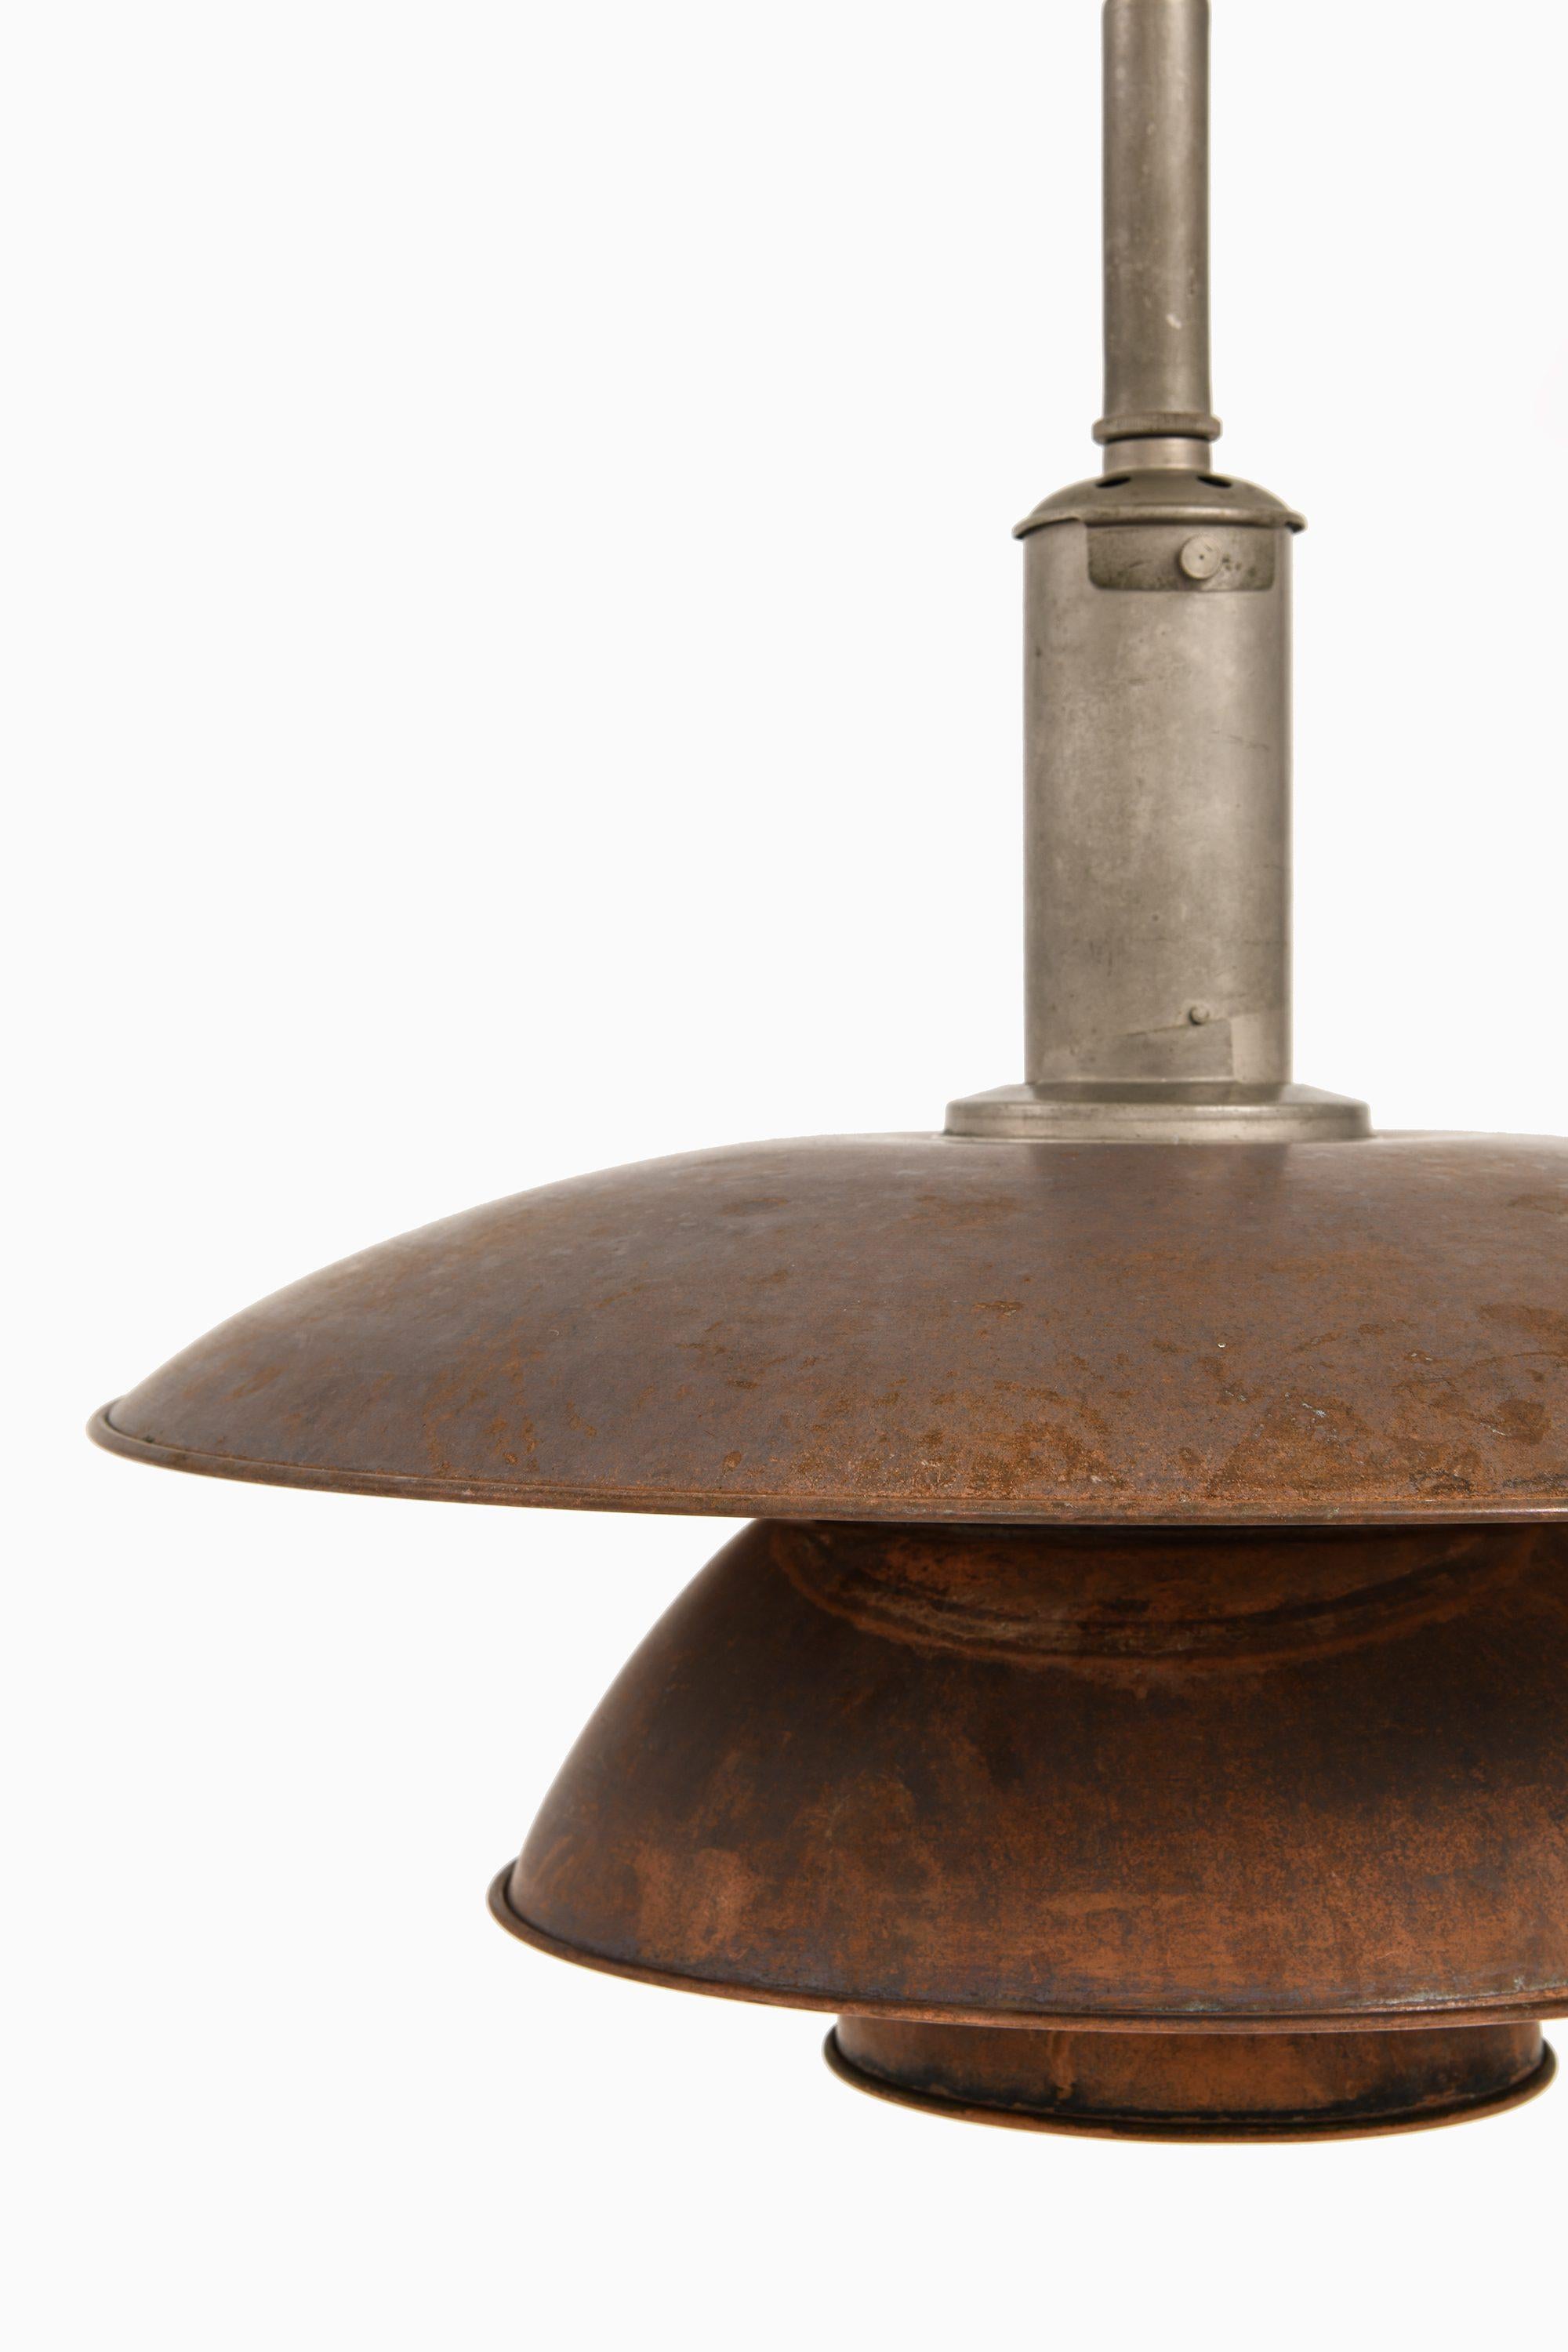 Danish Ceiling Lamp in Copper and Nickel Plated Steel by Poul Henningsen, 1920's For Sale